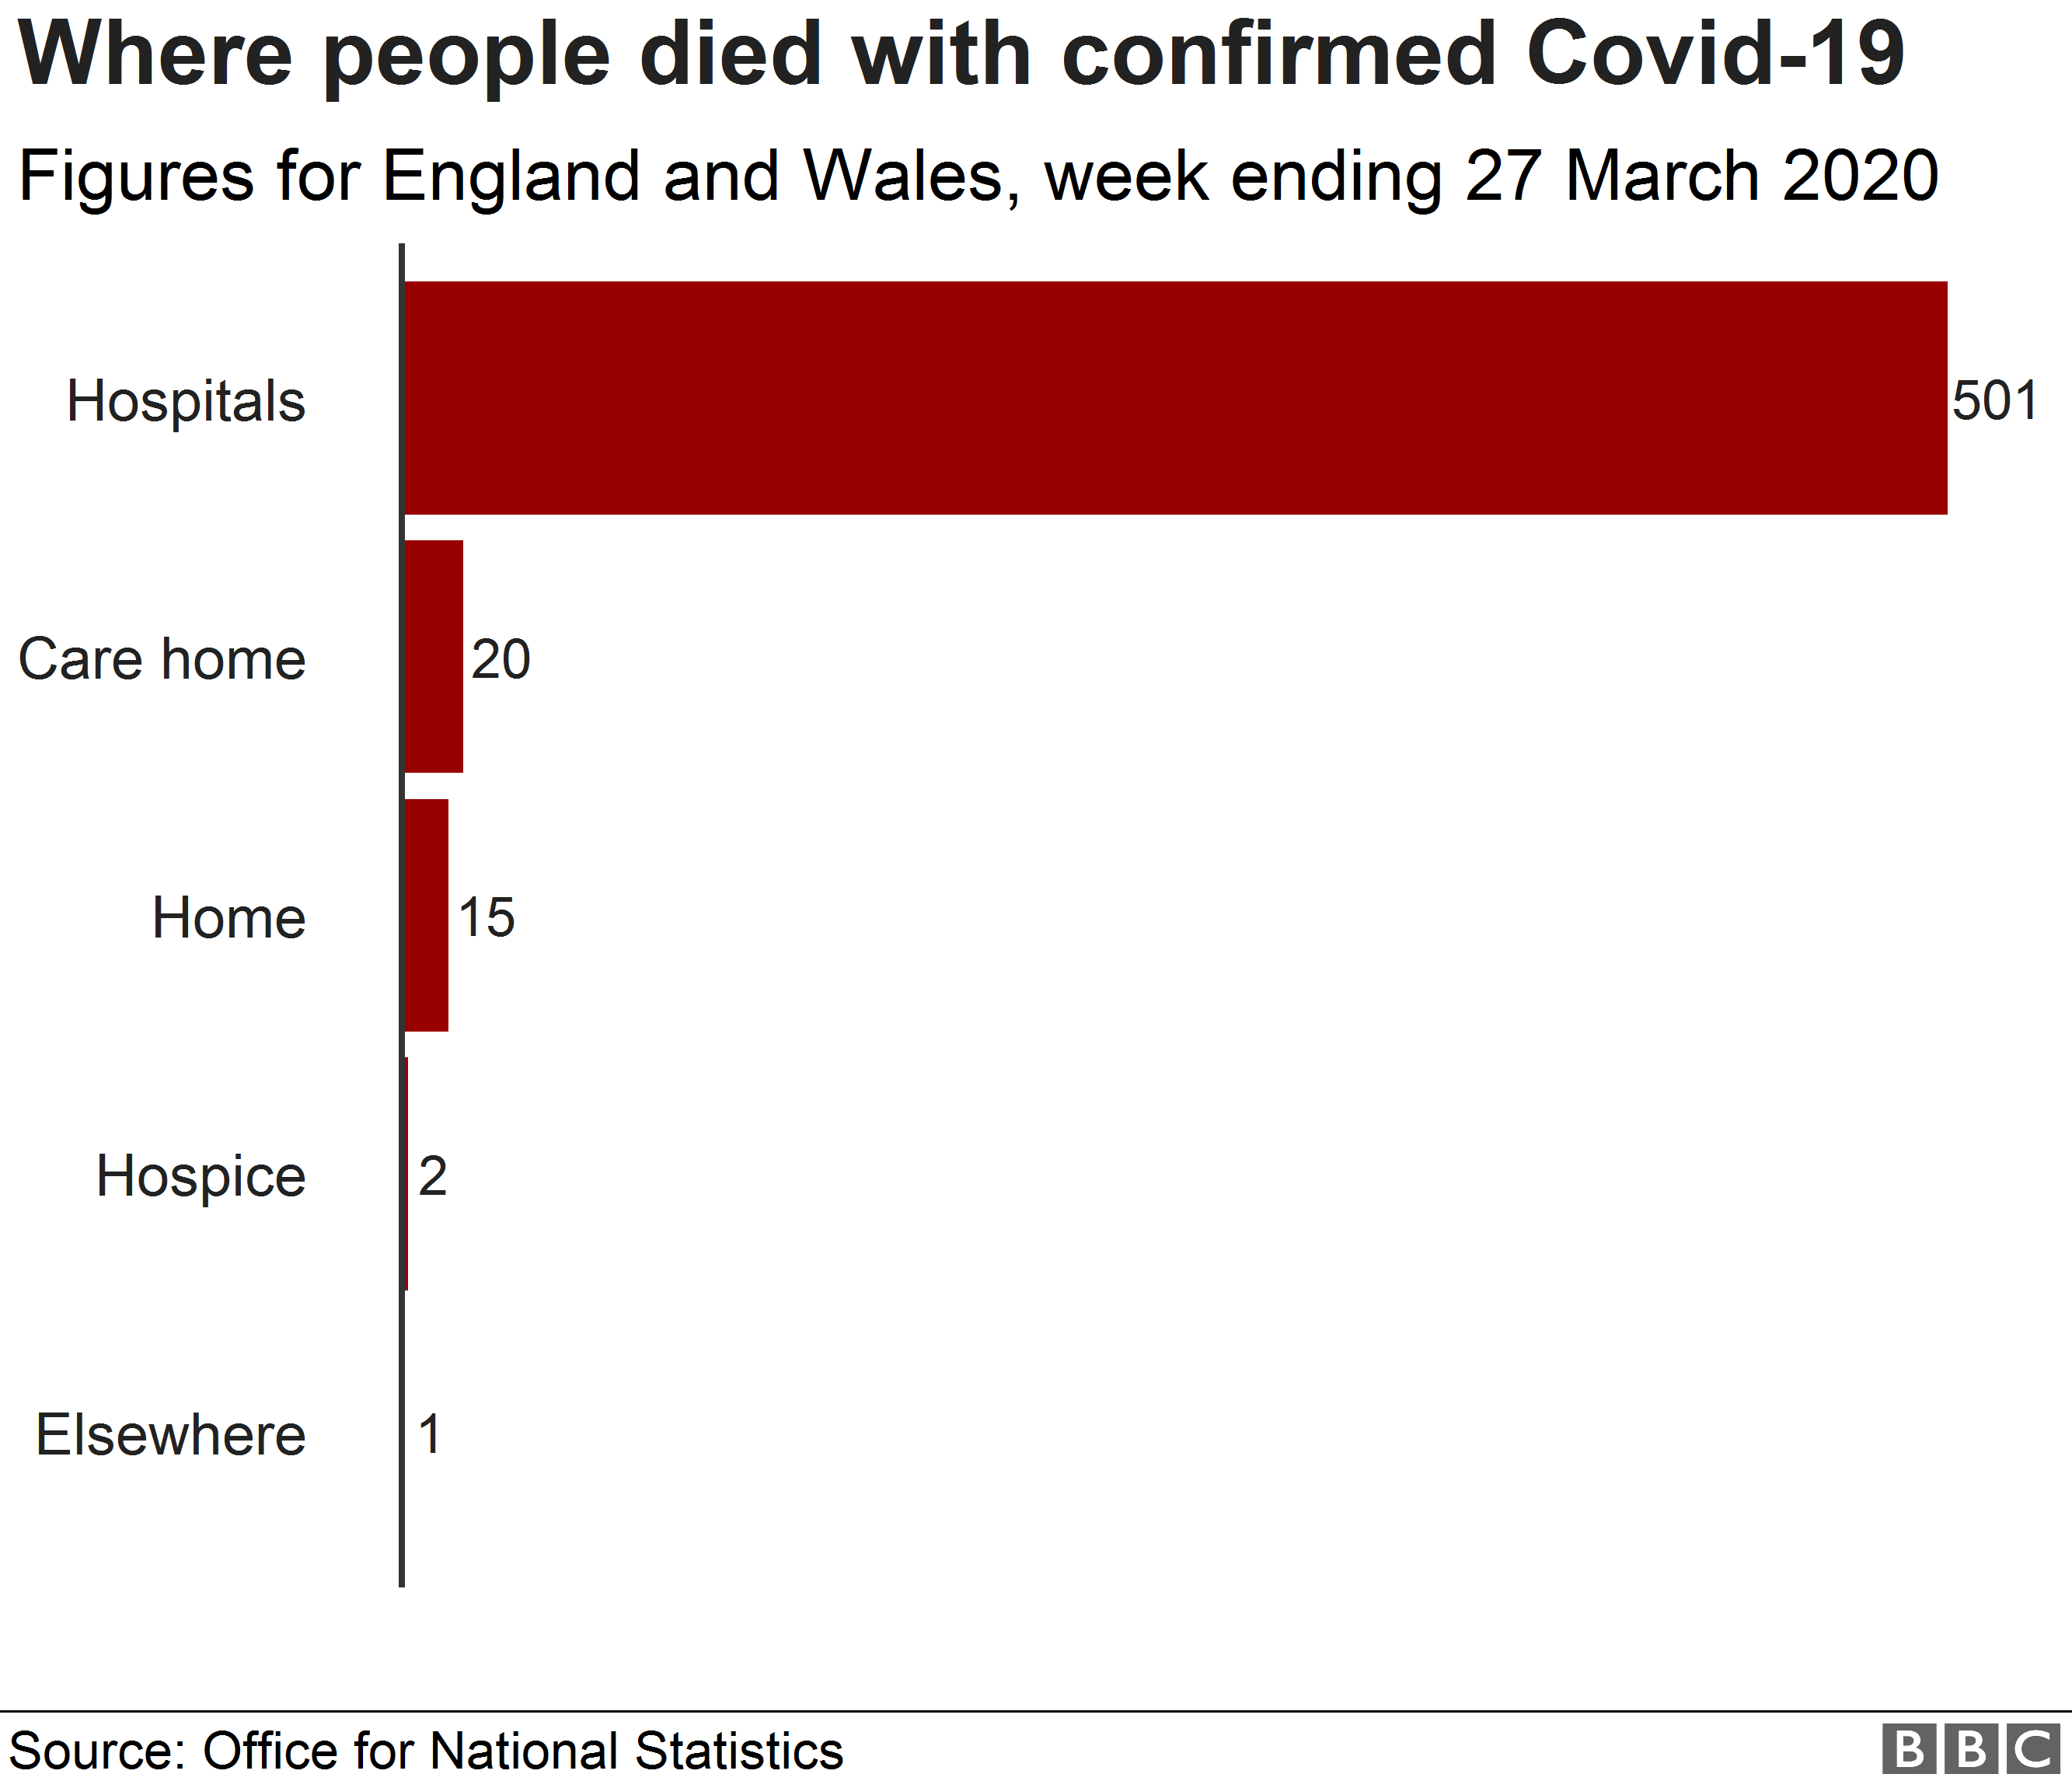 Chart showing deaths from Coronavirus in hospital (501), care home (20), home (15), hospice (2) and elsewhere (1) in the week ending 27 March in England and Wales.